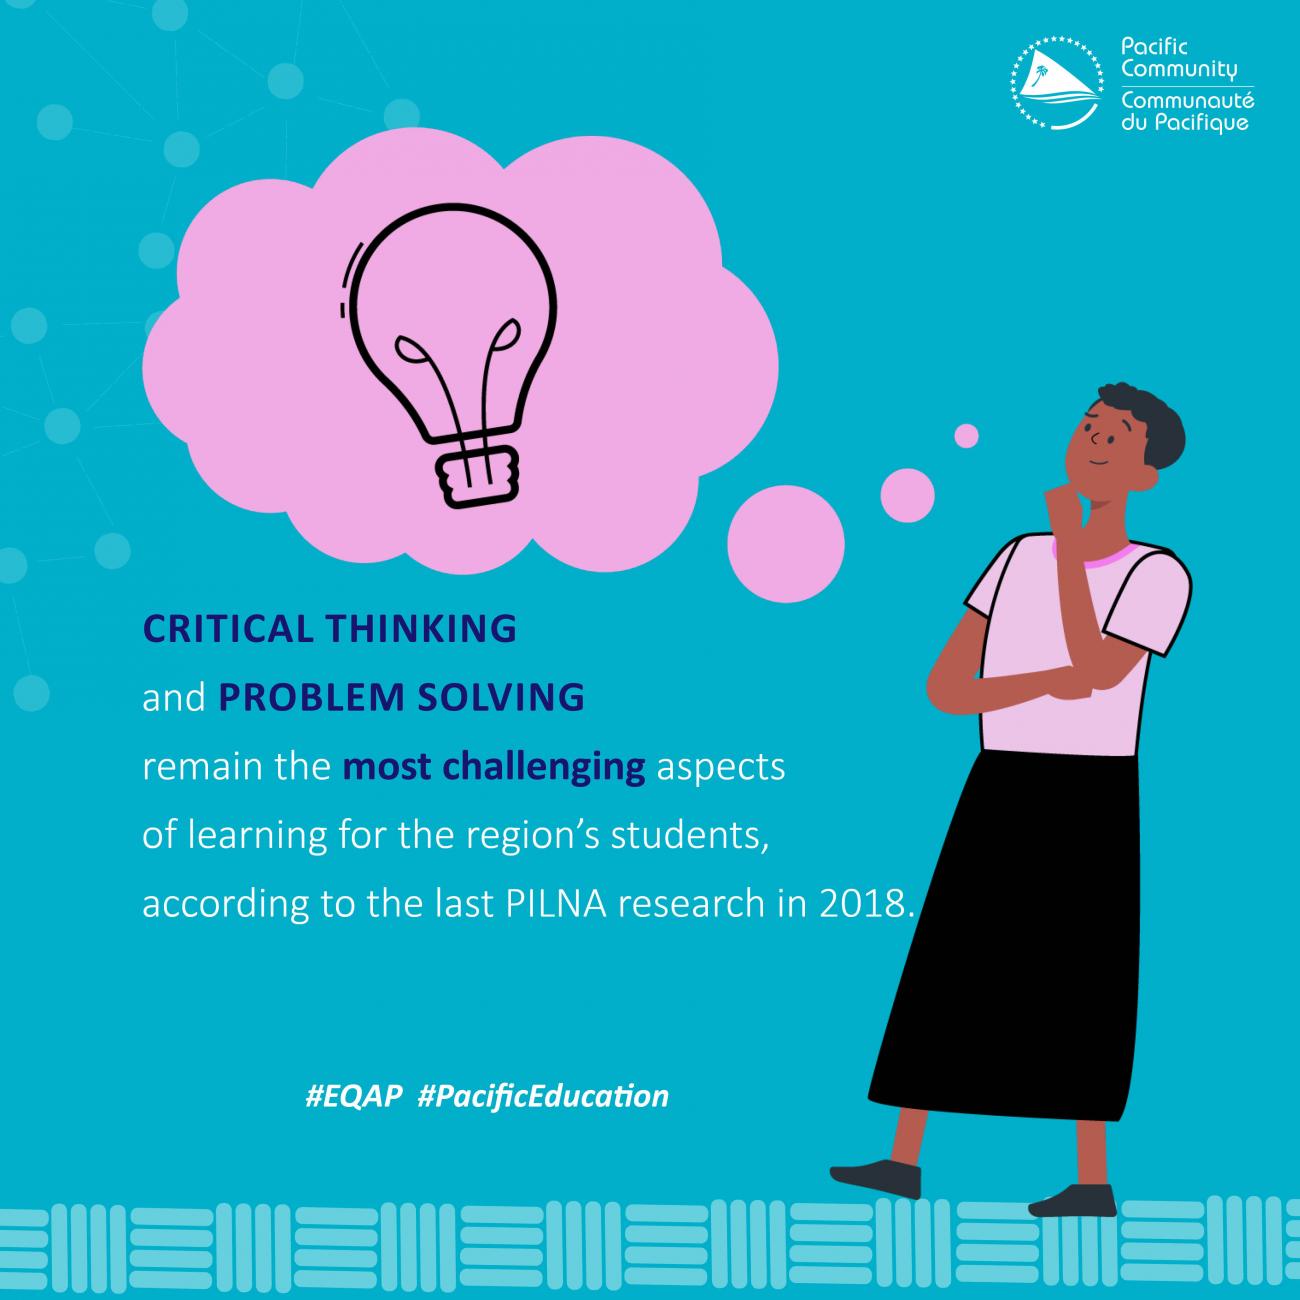 Critical thinking and problem solving remain the most challenging aspects of learning for the region's students.